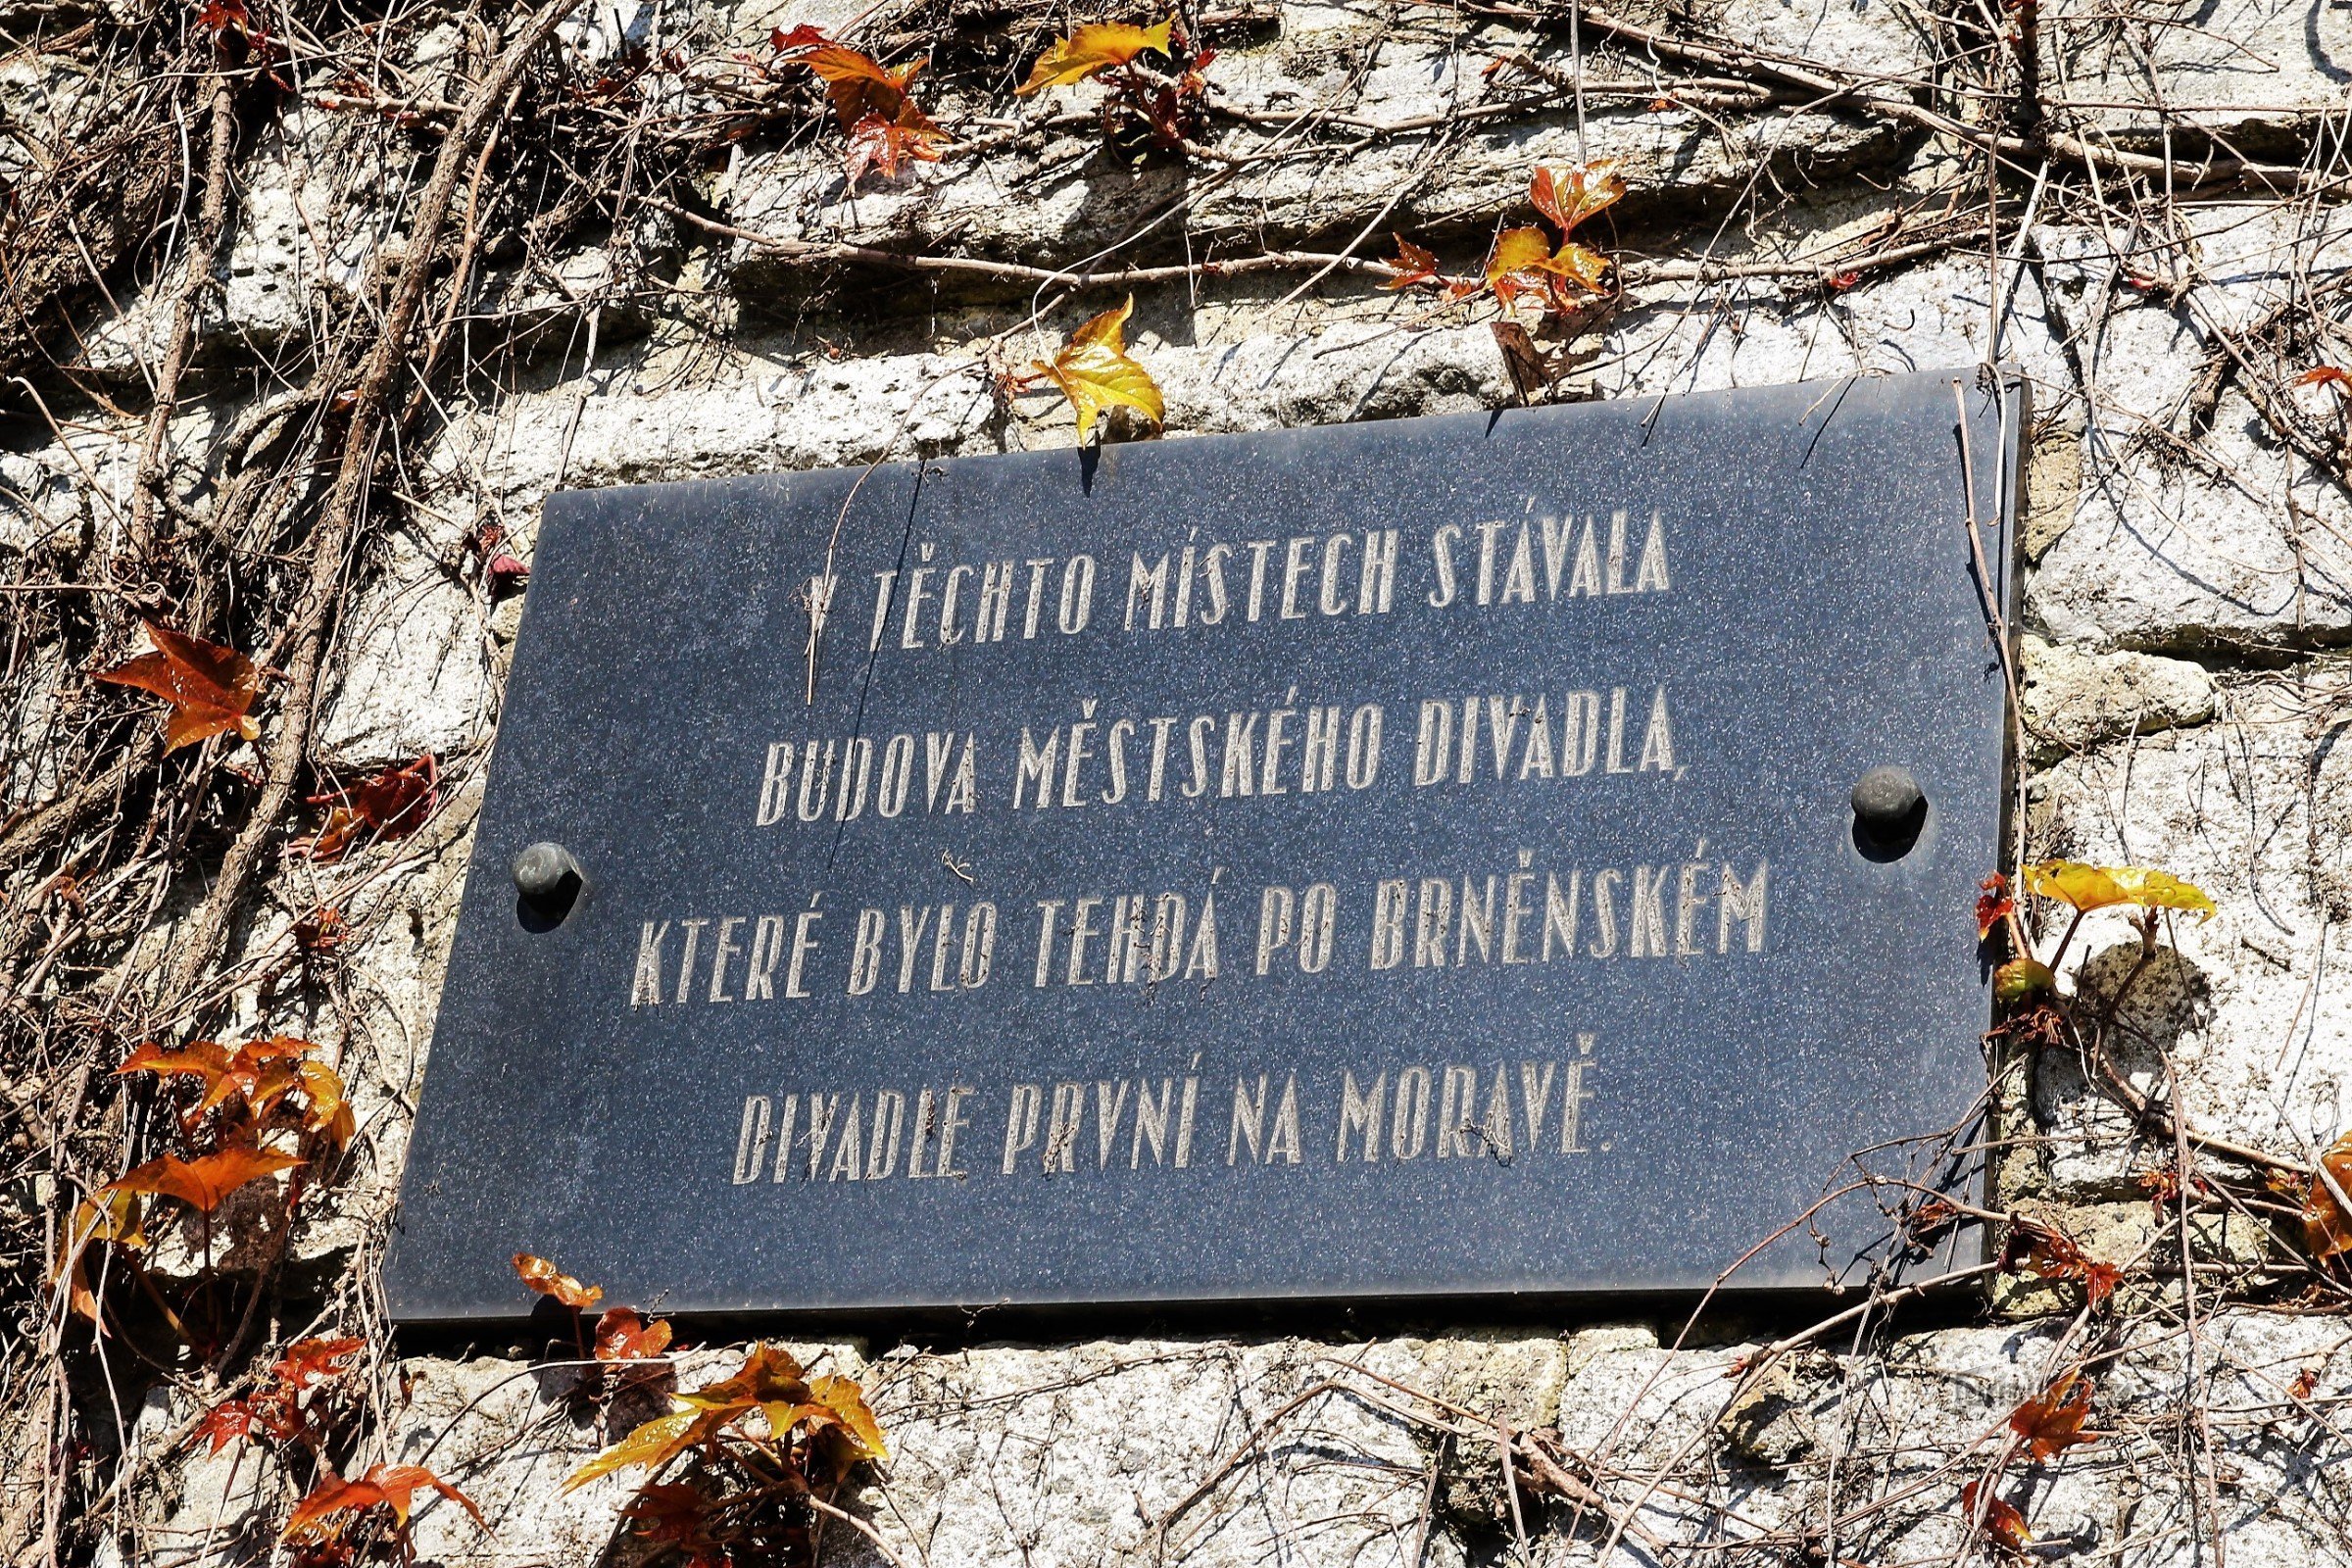 A memorial plaque as a reminder of the Olešní theater